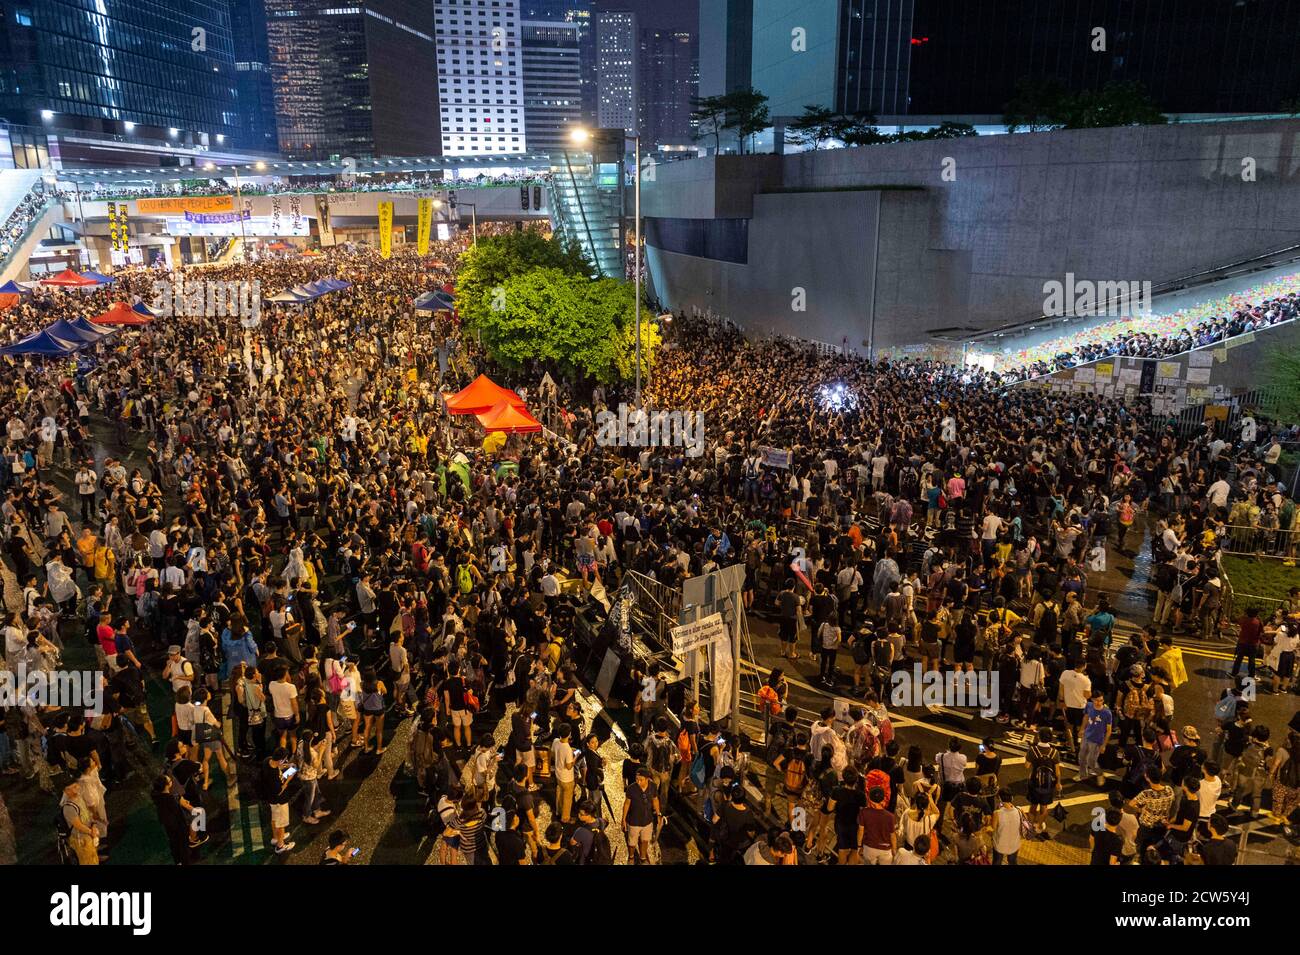 Hong Kong, Hong Kong, China. 3rd Oct, 2014. Protesters succeed in keeping Harcourt Road closed outside the Chief Executives office in the LegCo building, Tamar, Admiralty. Students maintain their pro-democracy sit-in while police take no action to stop them. Harcourt Road remains filled with protesters.Alamy Stock Image/Jayne Russell Credit: Jayne Russell/ZUMA Wire/Alamy Live News Stock Photo